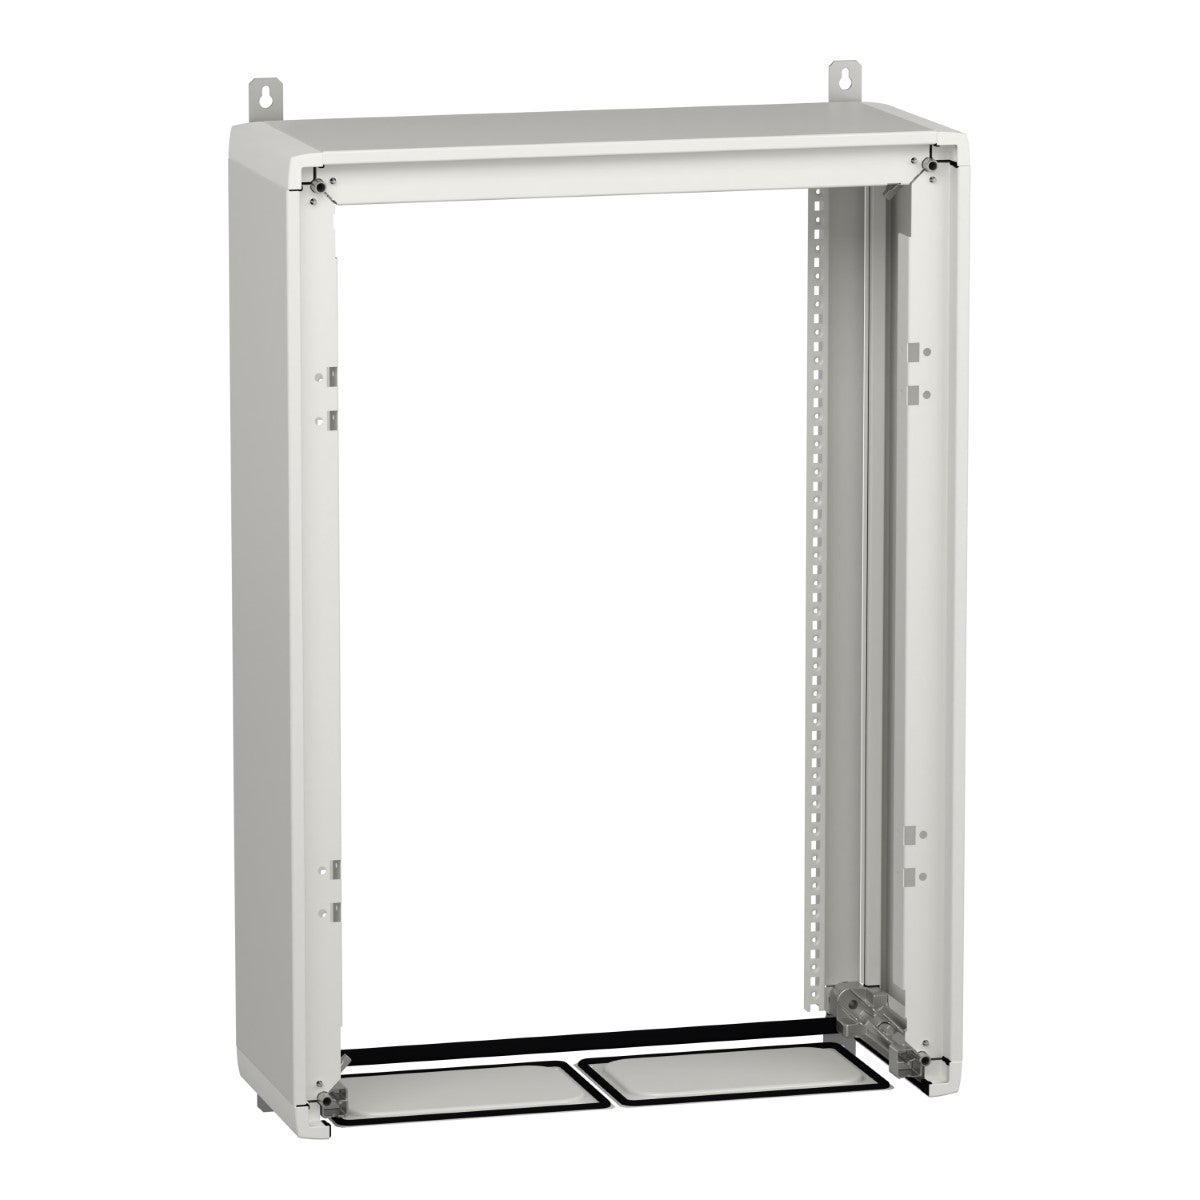 Enclosure, PrismaSeT G, wall mounted/floor standing, without plinth, 15M, W600mm, H850mm, IP55